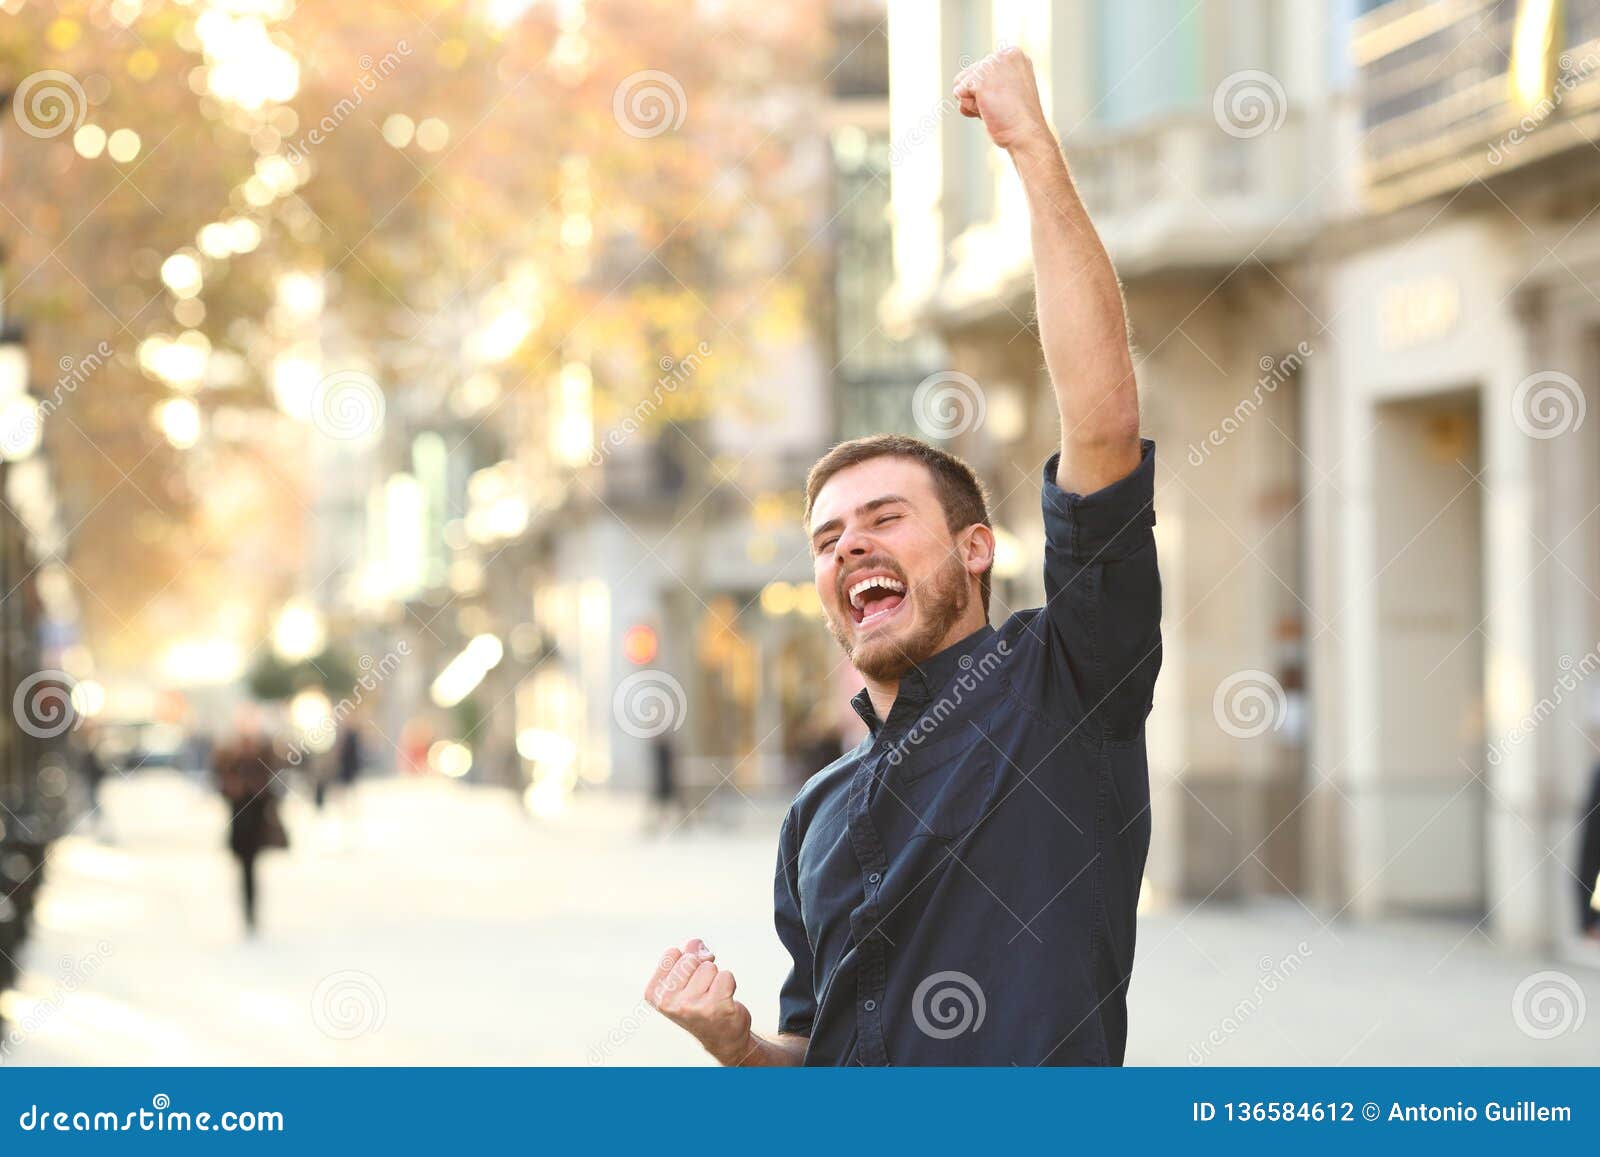 excited man raising arms celebrating sucess